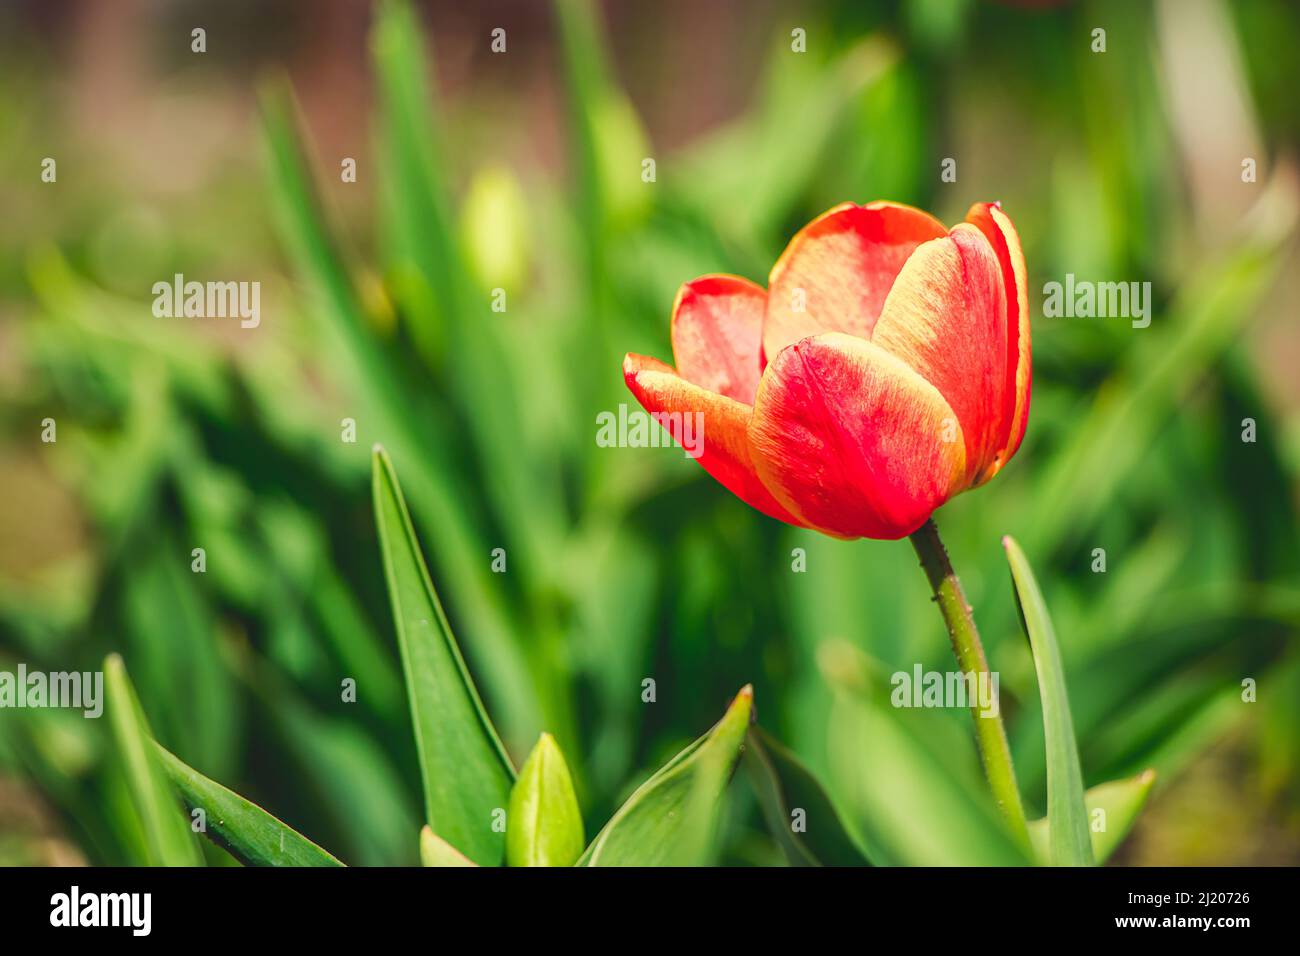 Tulip flower close up. Delicate bud, symbol of spring. Growing tulips at home garden. Stock Photo